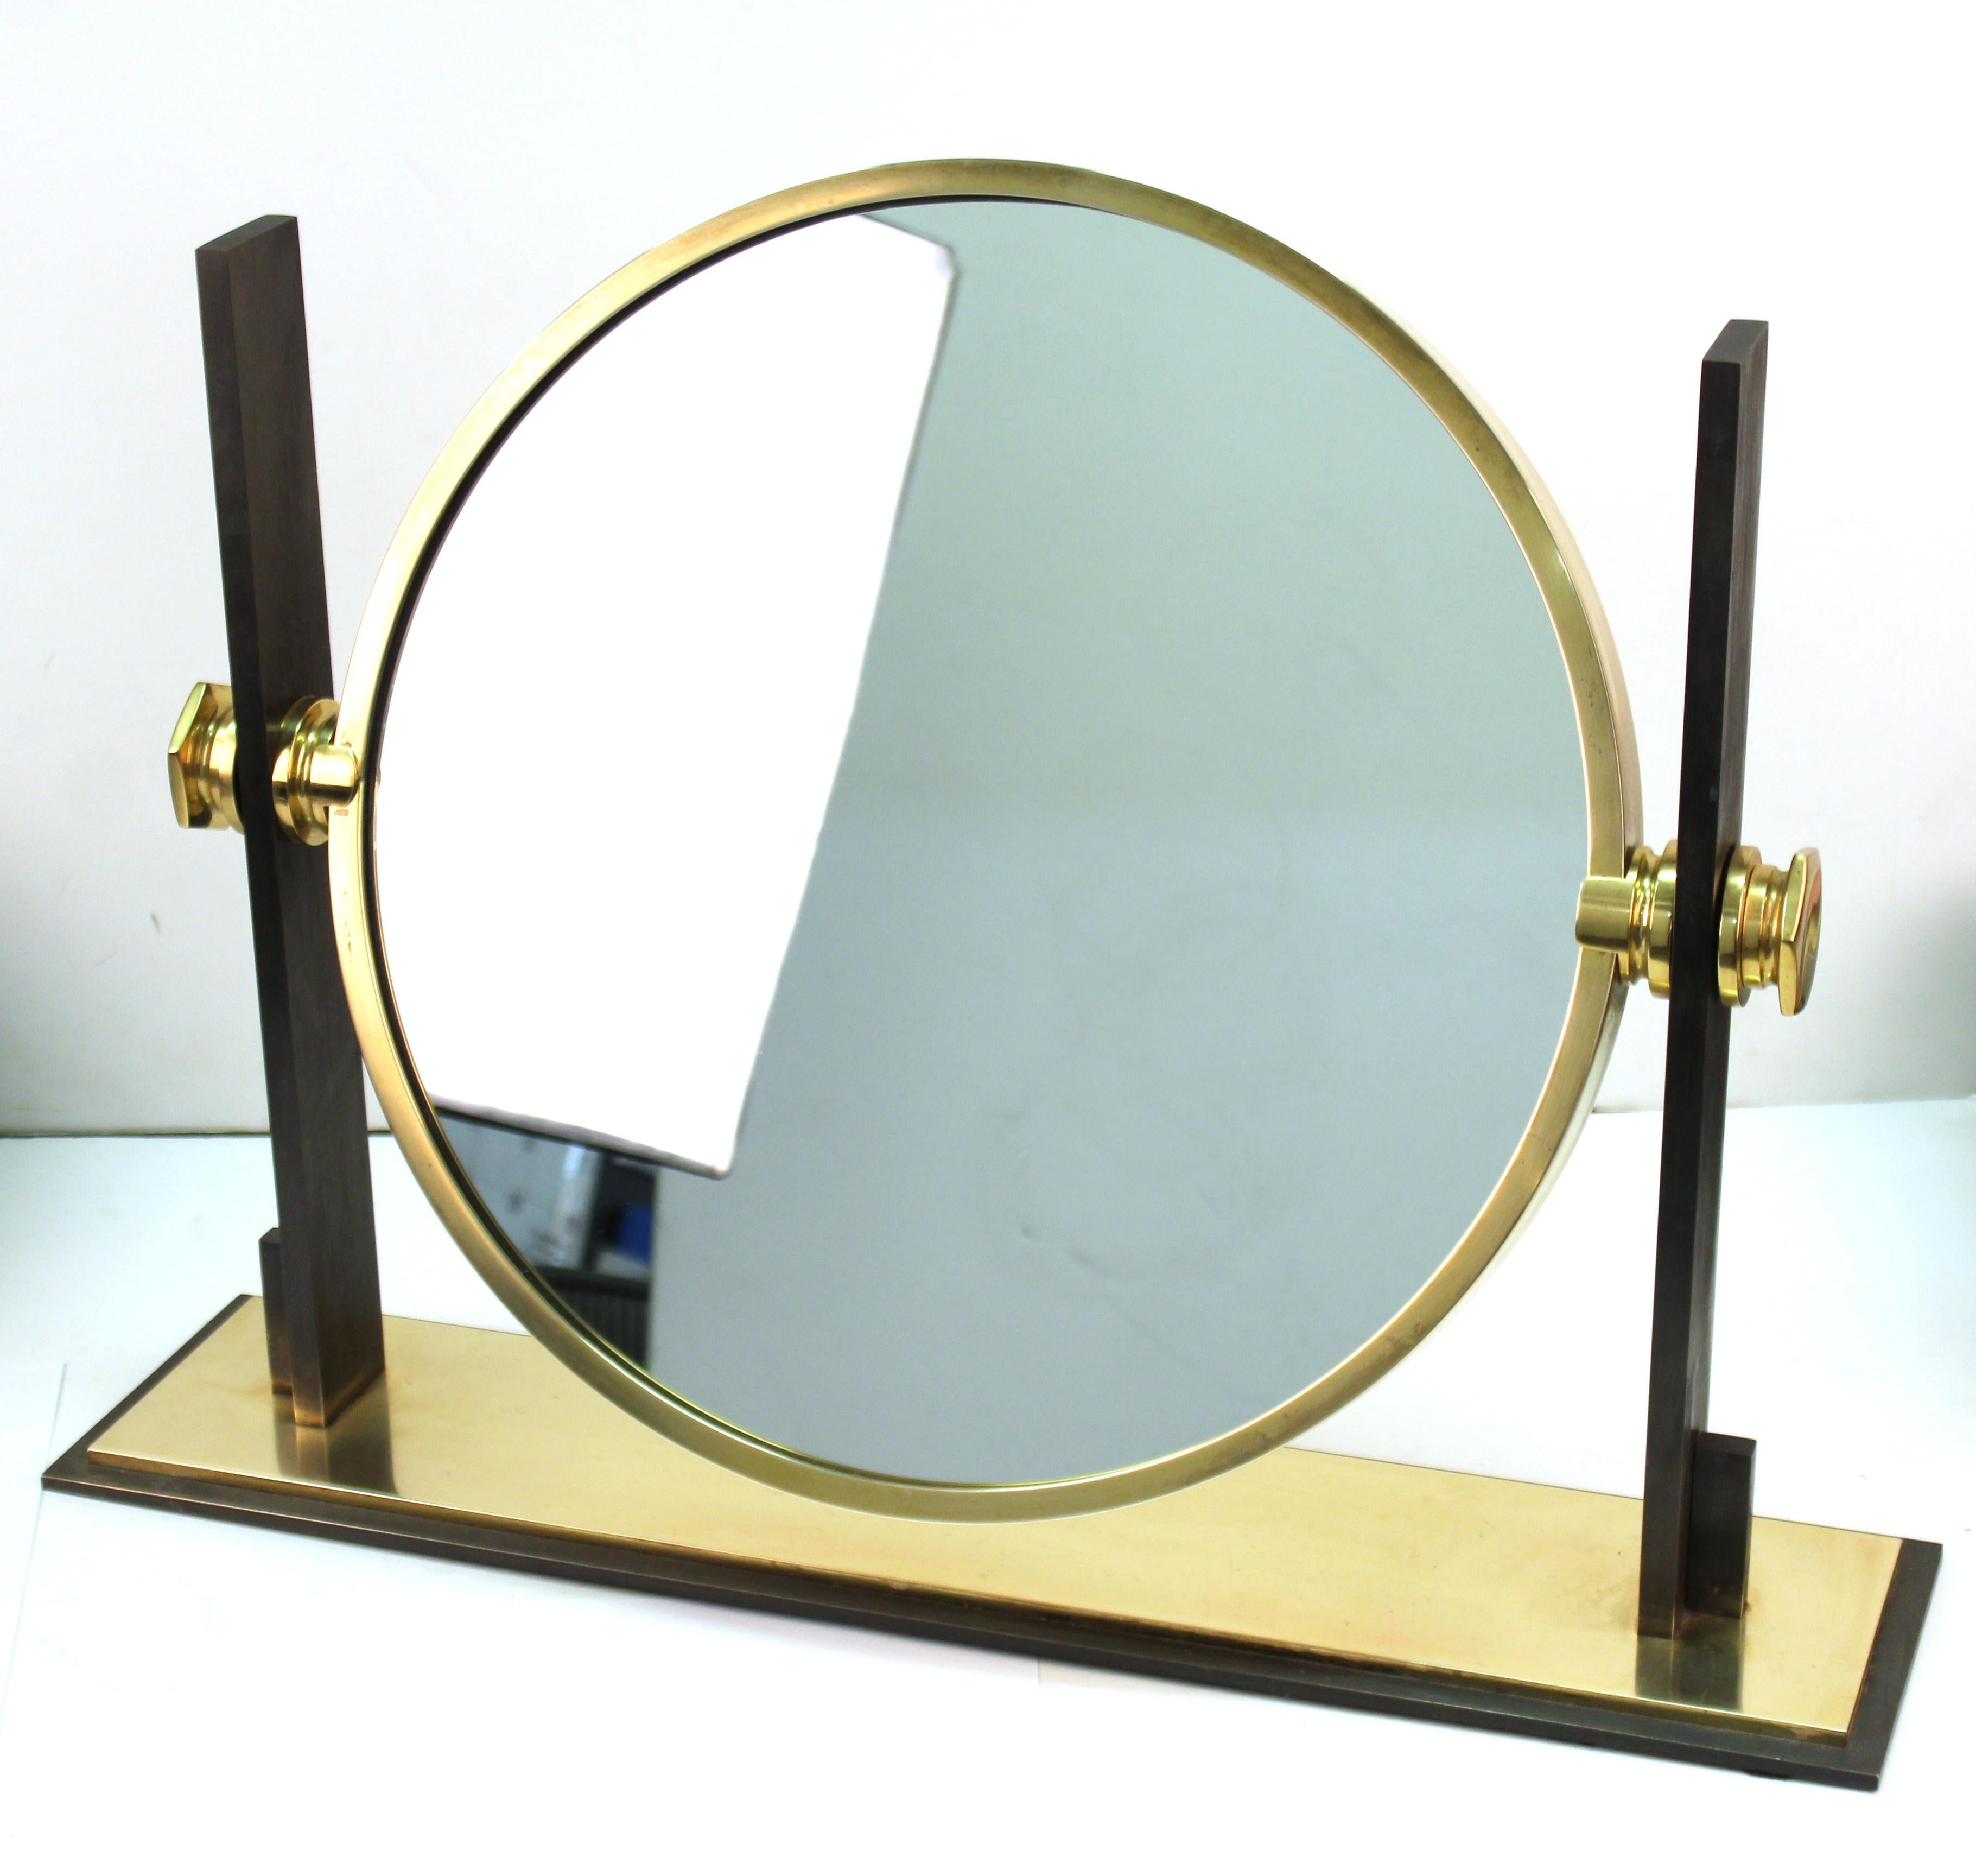 Modern round vanity or table mirror designed by Karl Springer. The piece is made with a brass and heavy steel structure. Mirror revolves and can flip from the convex side to a flat regular side. In great vintage condition with age-appropriate wear.